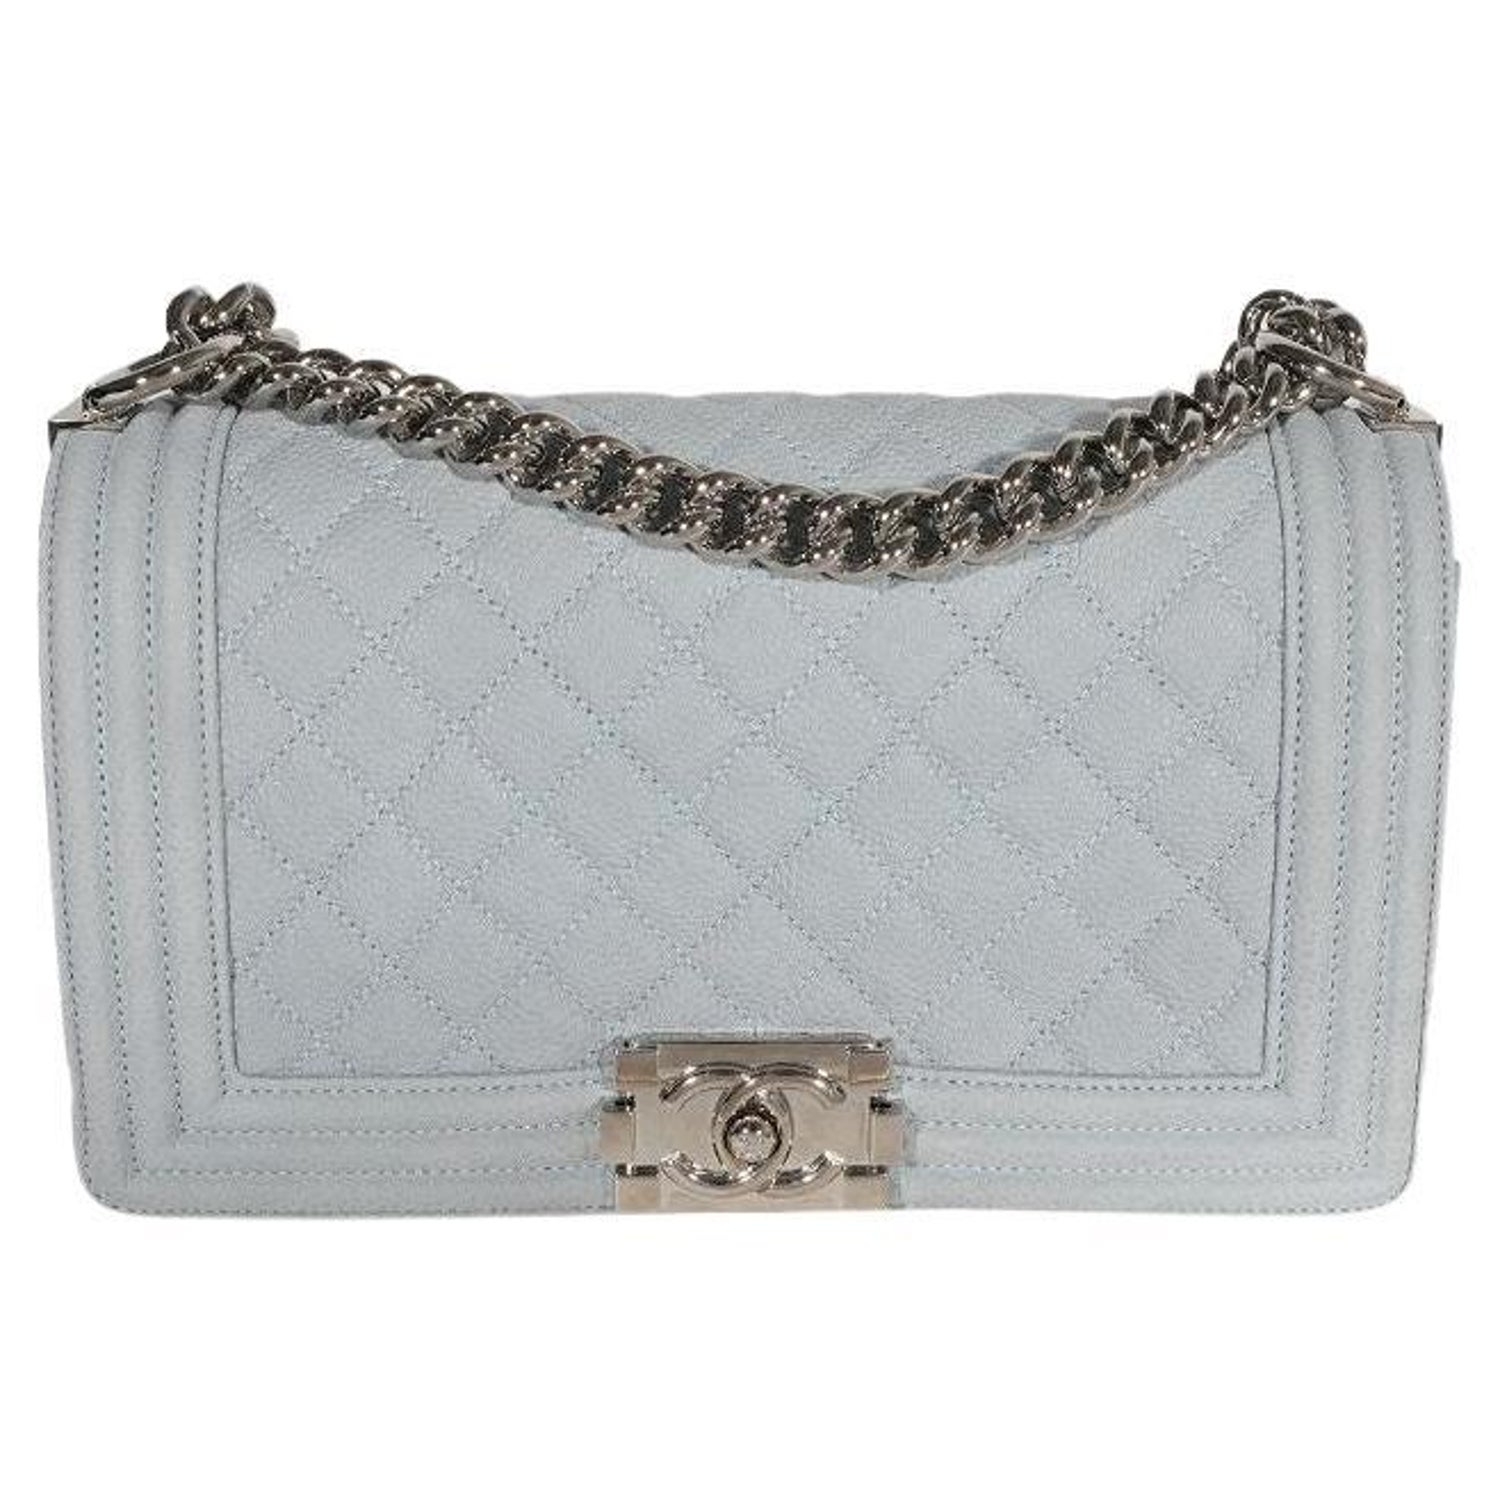 Chanel Limited Edition Light Blue Leather and Mosaic Medium Boy